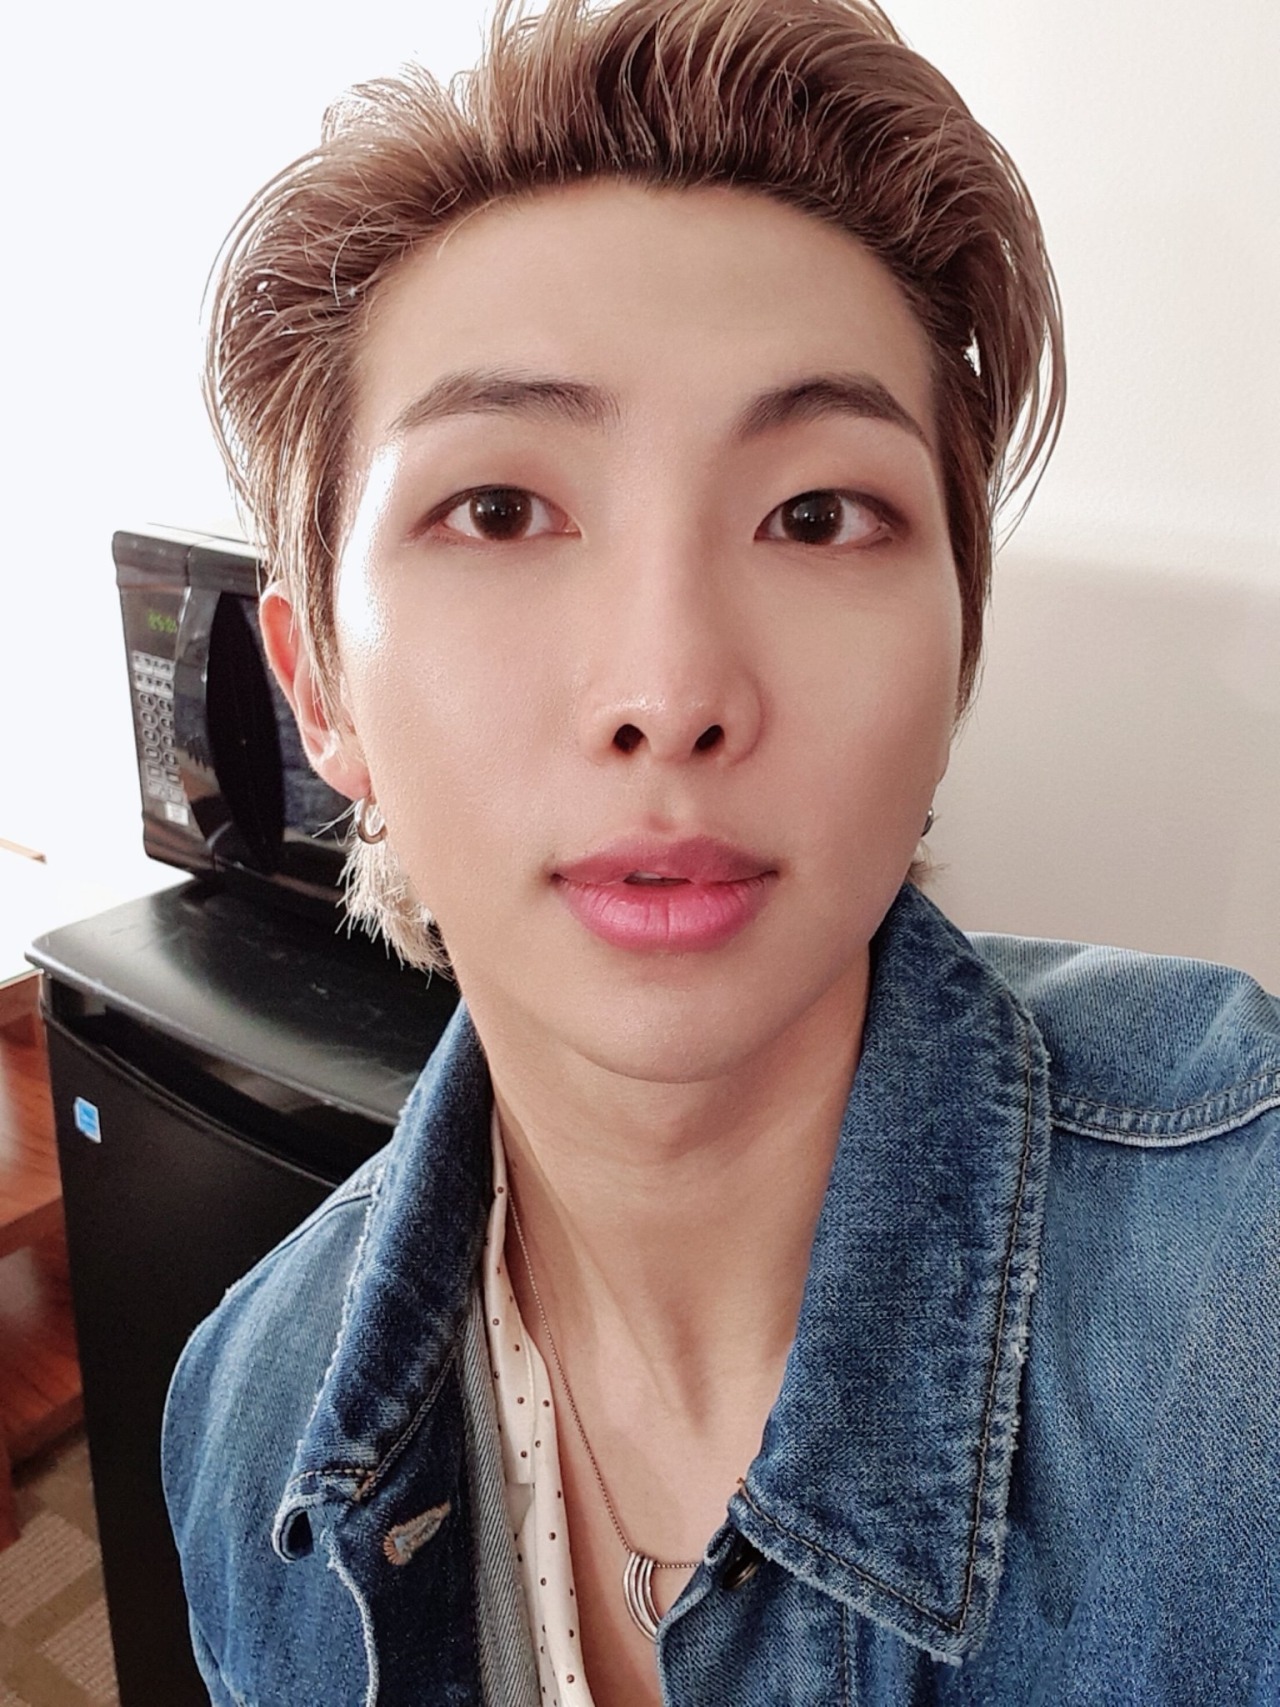 BTS' RM adds a bit of spice to Namjooning with a mirror selca on